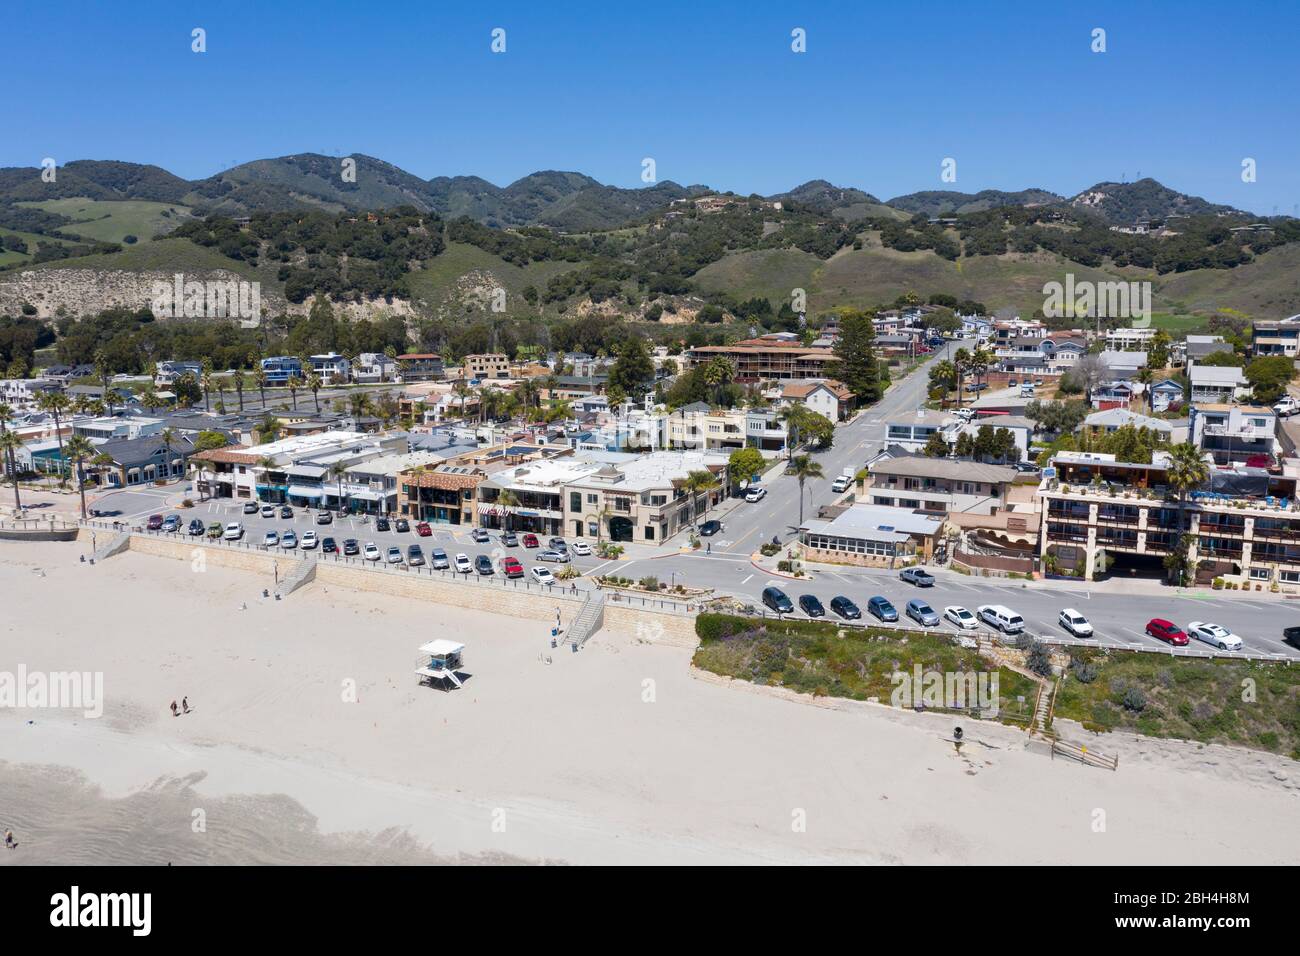 Aerial views above the town Avila Beach on the Central Coast of California Stock Photo